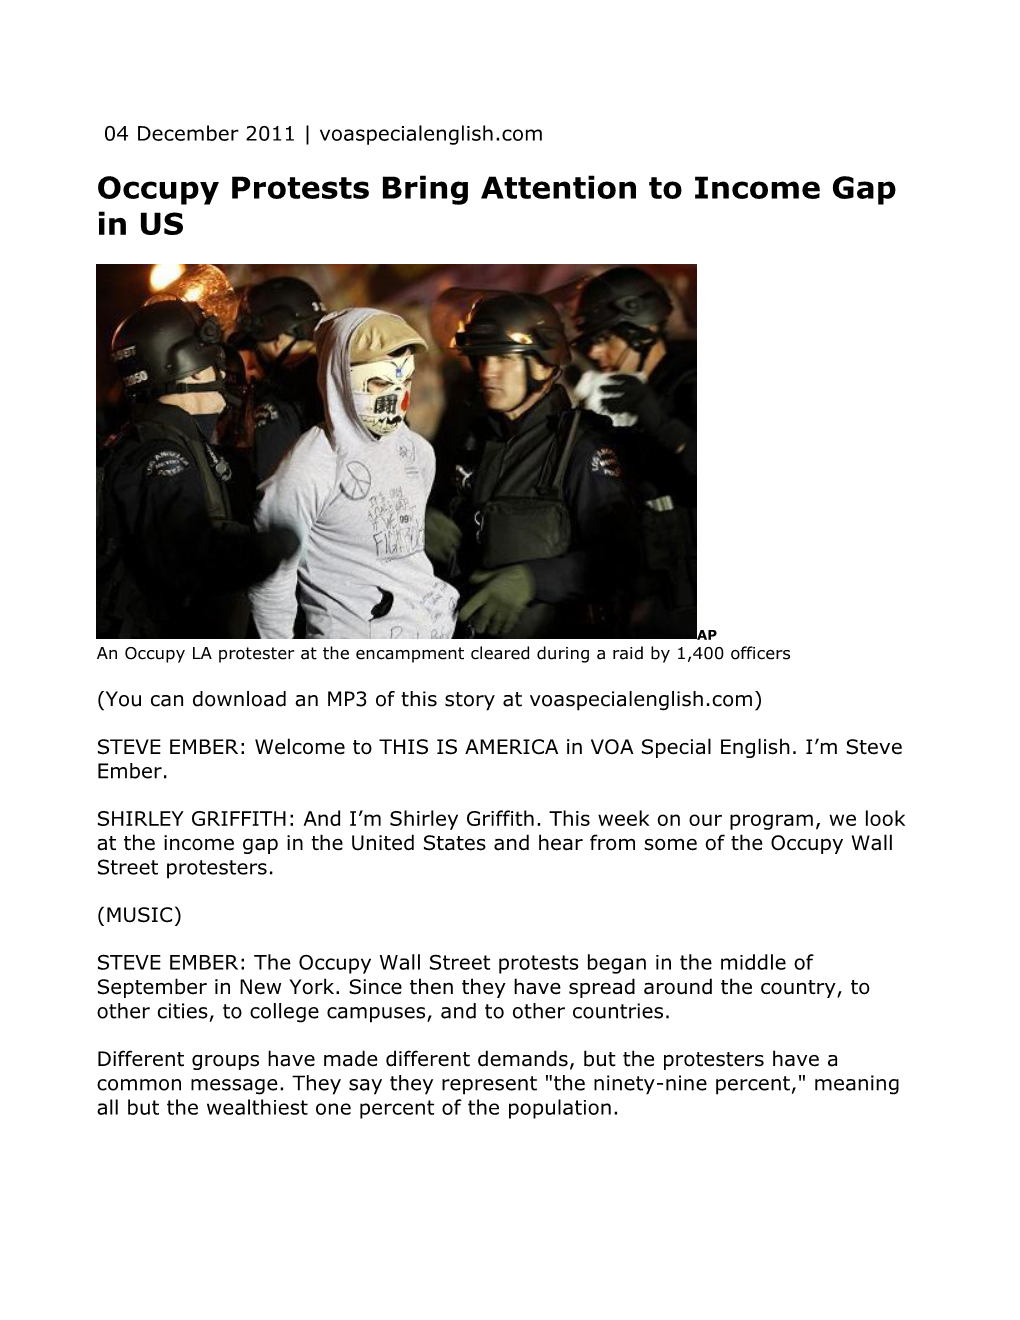 Occupy Protests Bring Attention to Income Gap in US